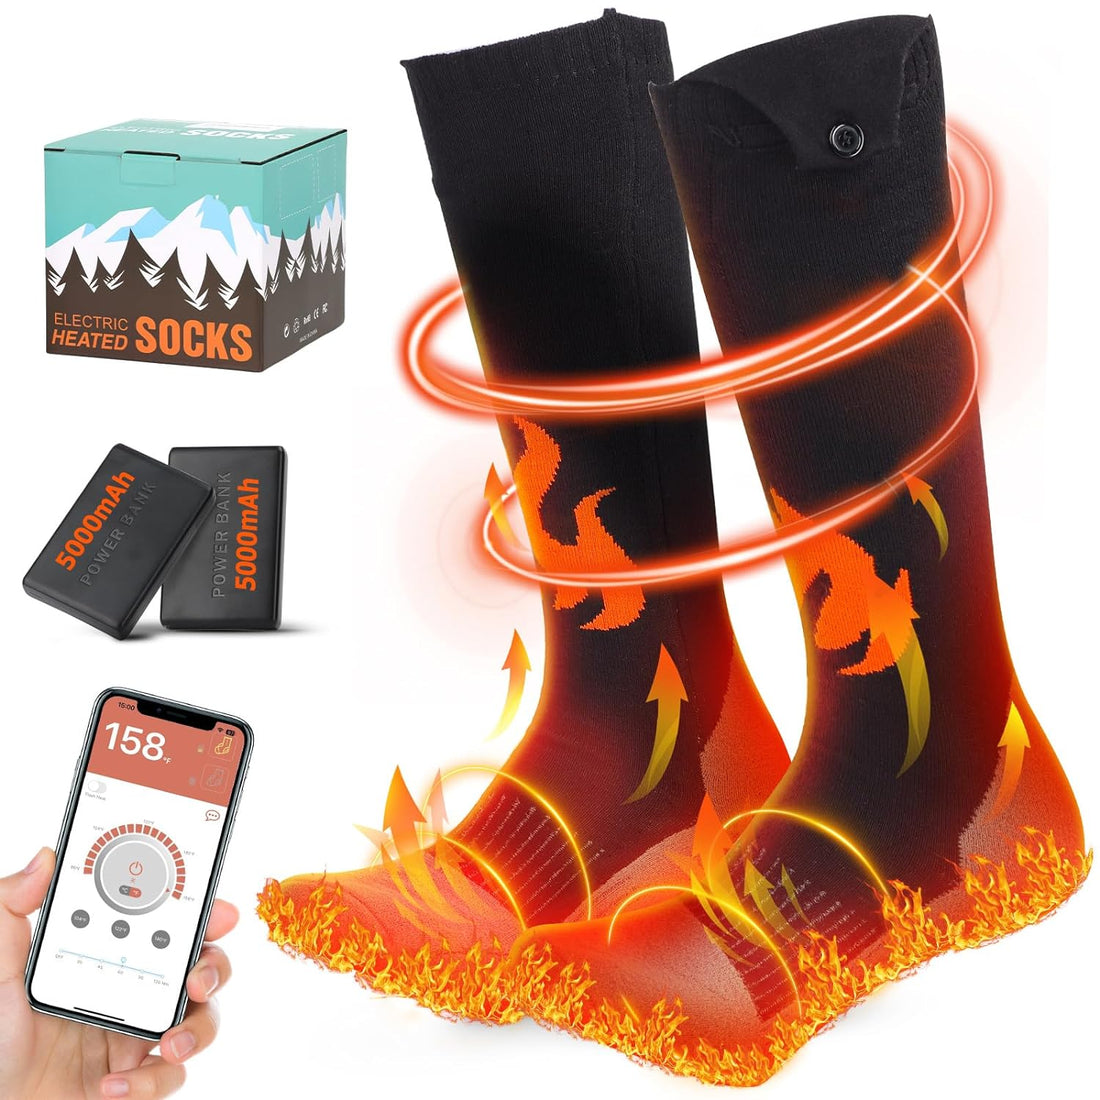 5000 mAh Electric Socks for Men Rechargeable, App-Controlled Timer Battery Woman Heated Socks 5 Temperature Electric Socks, Up to 11 Hours Foot Warmers for Women Hunting Fishing Hiking Camping, M